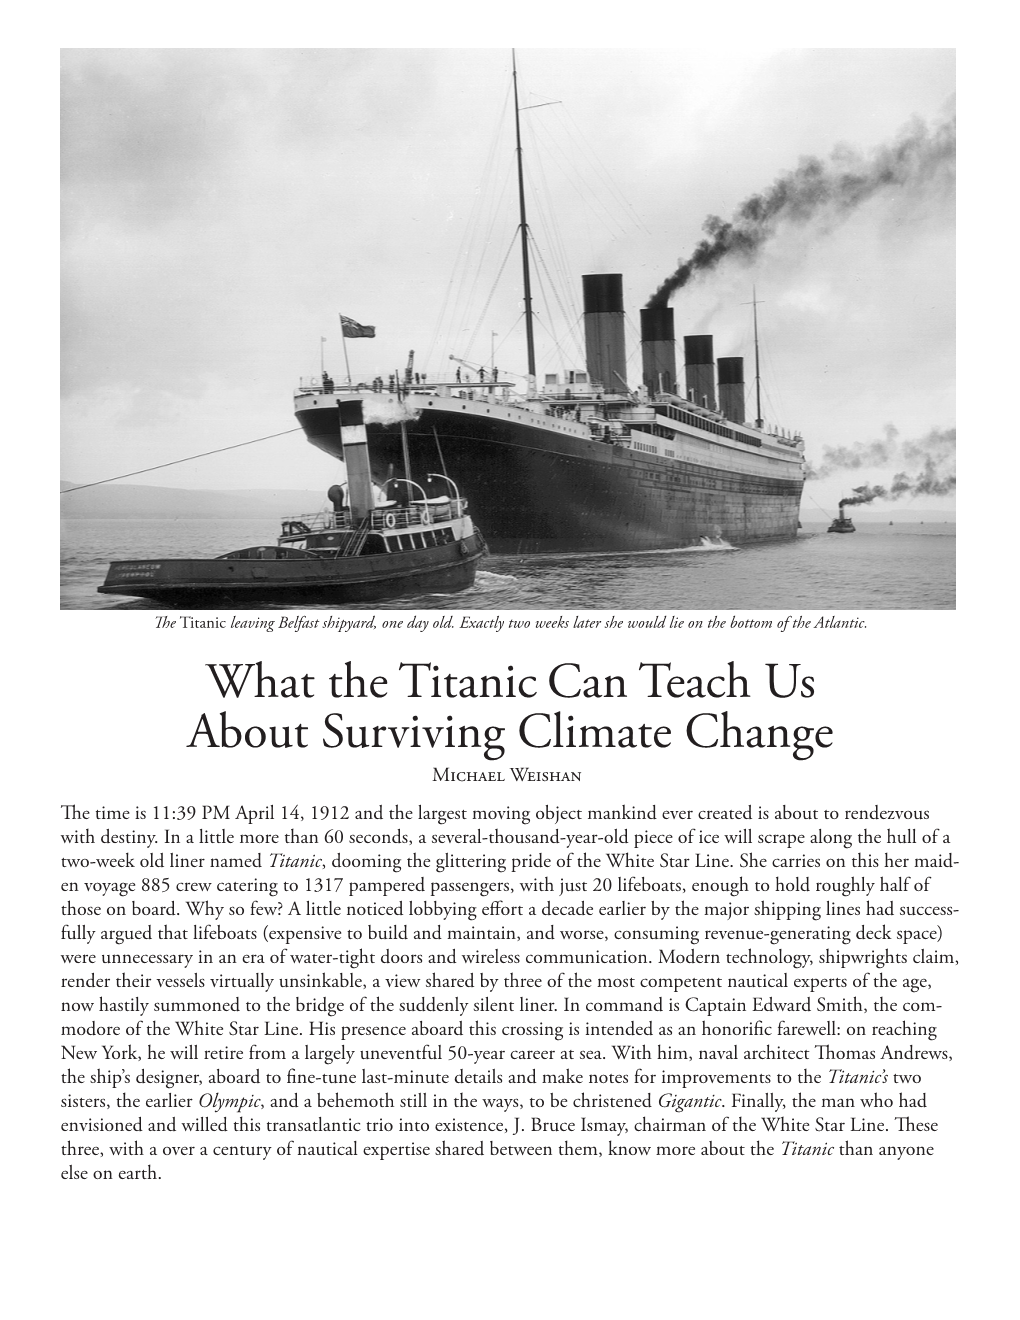 What the Titanic Can Teach Us About Surviving Climate Change